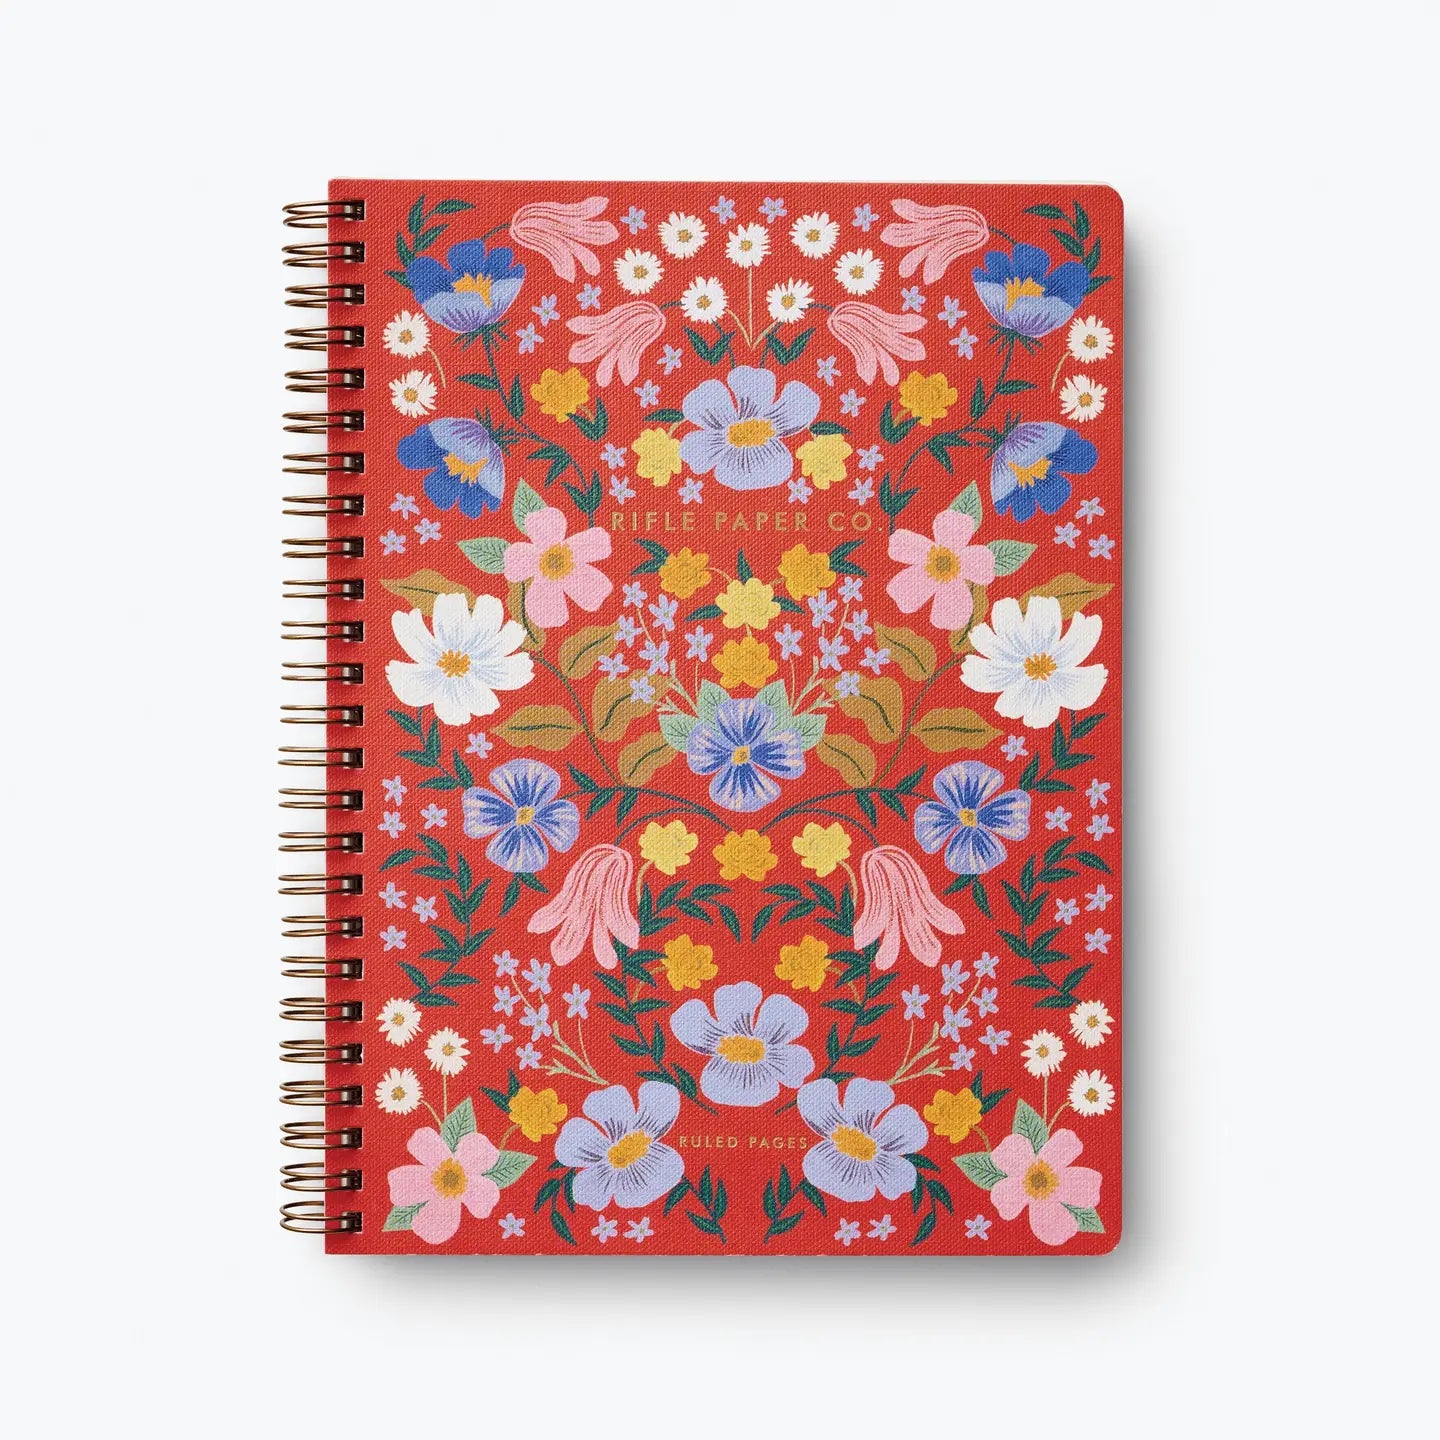 Bramble Spiral Notebook - Rifle Paper Co.